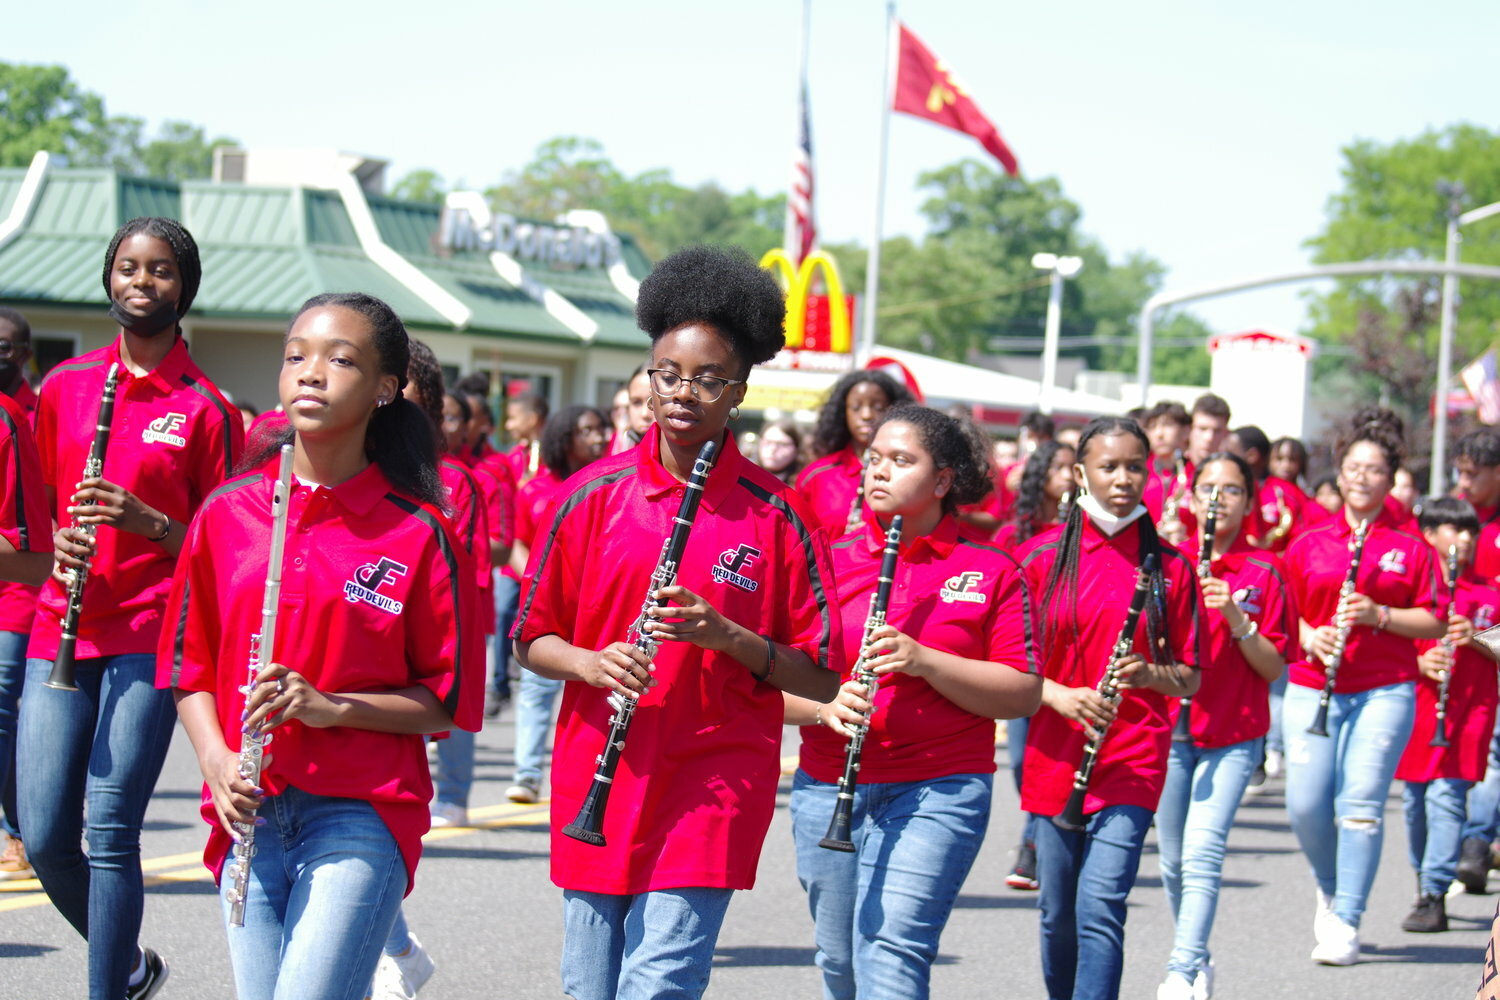 Students ranging from elementary to high school level in Freeport Public Schools demonstrated their professional-level skills both in playing and marching at last year’s Memorial Day parade.